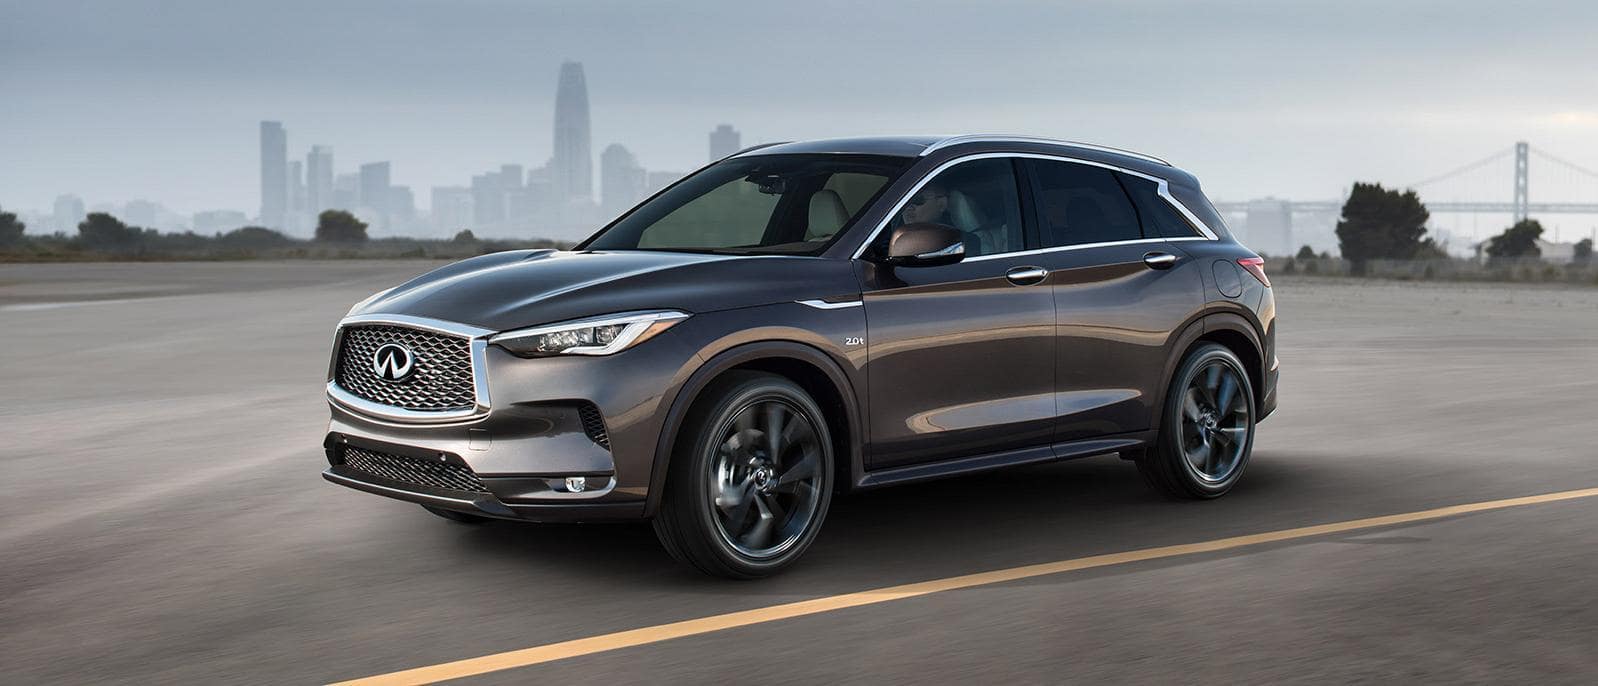 INFINITI QX50 AWD LUXE front profile in the motion